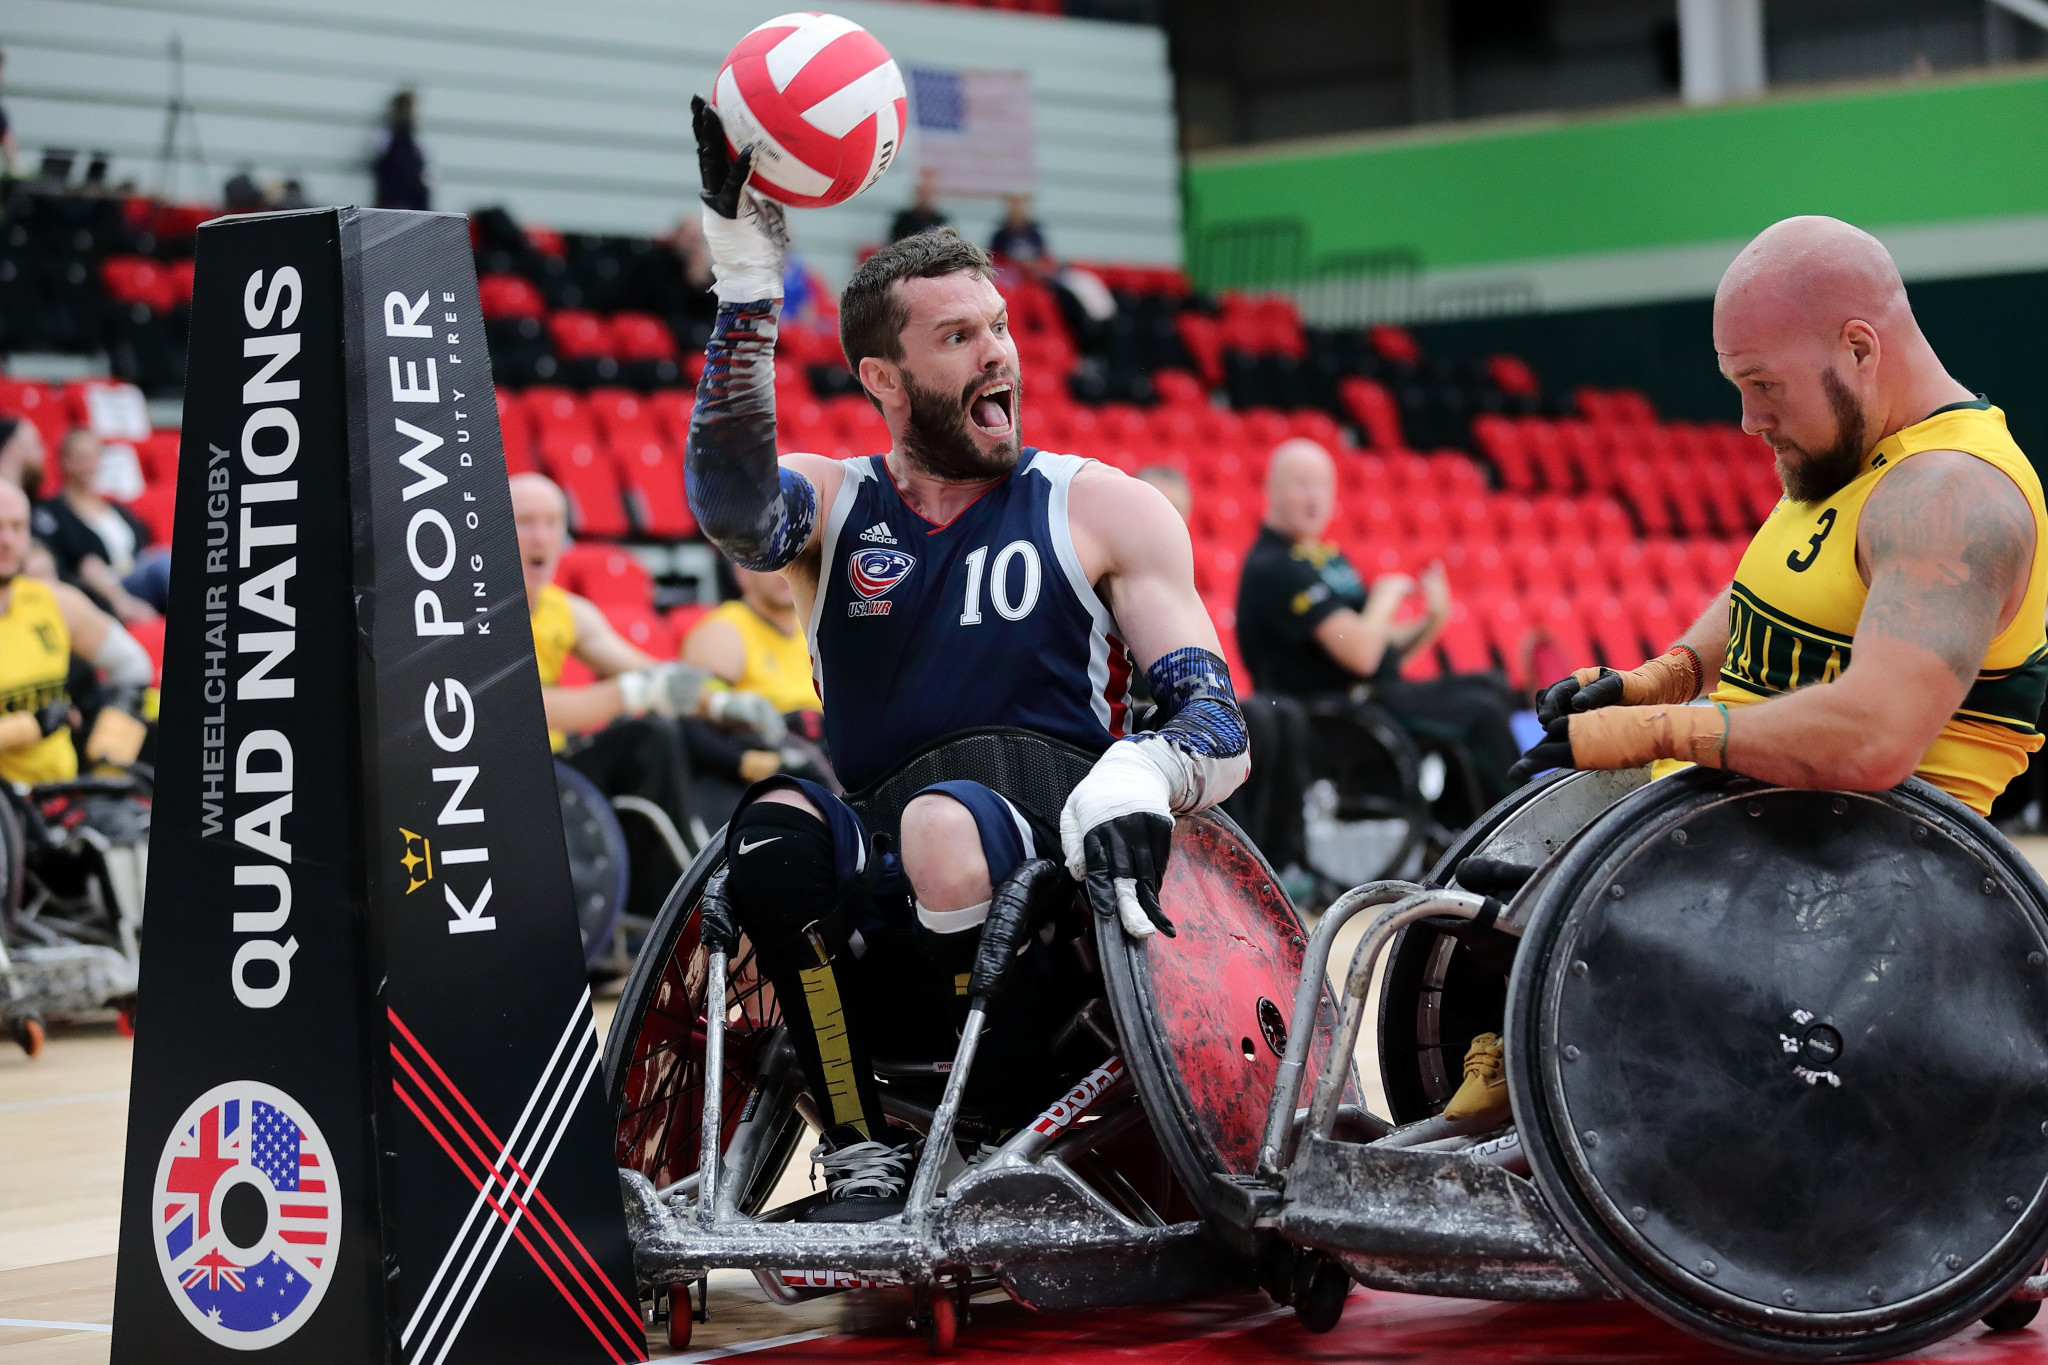 Unbeaten United States into Wheelchair Rugby Quad Nations final